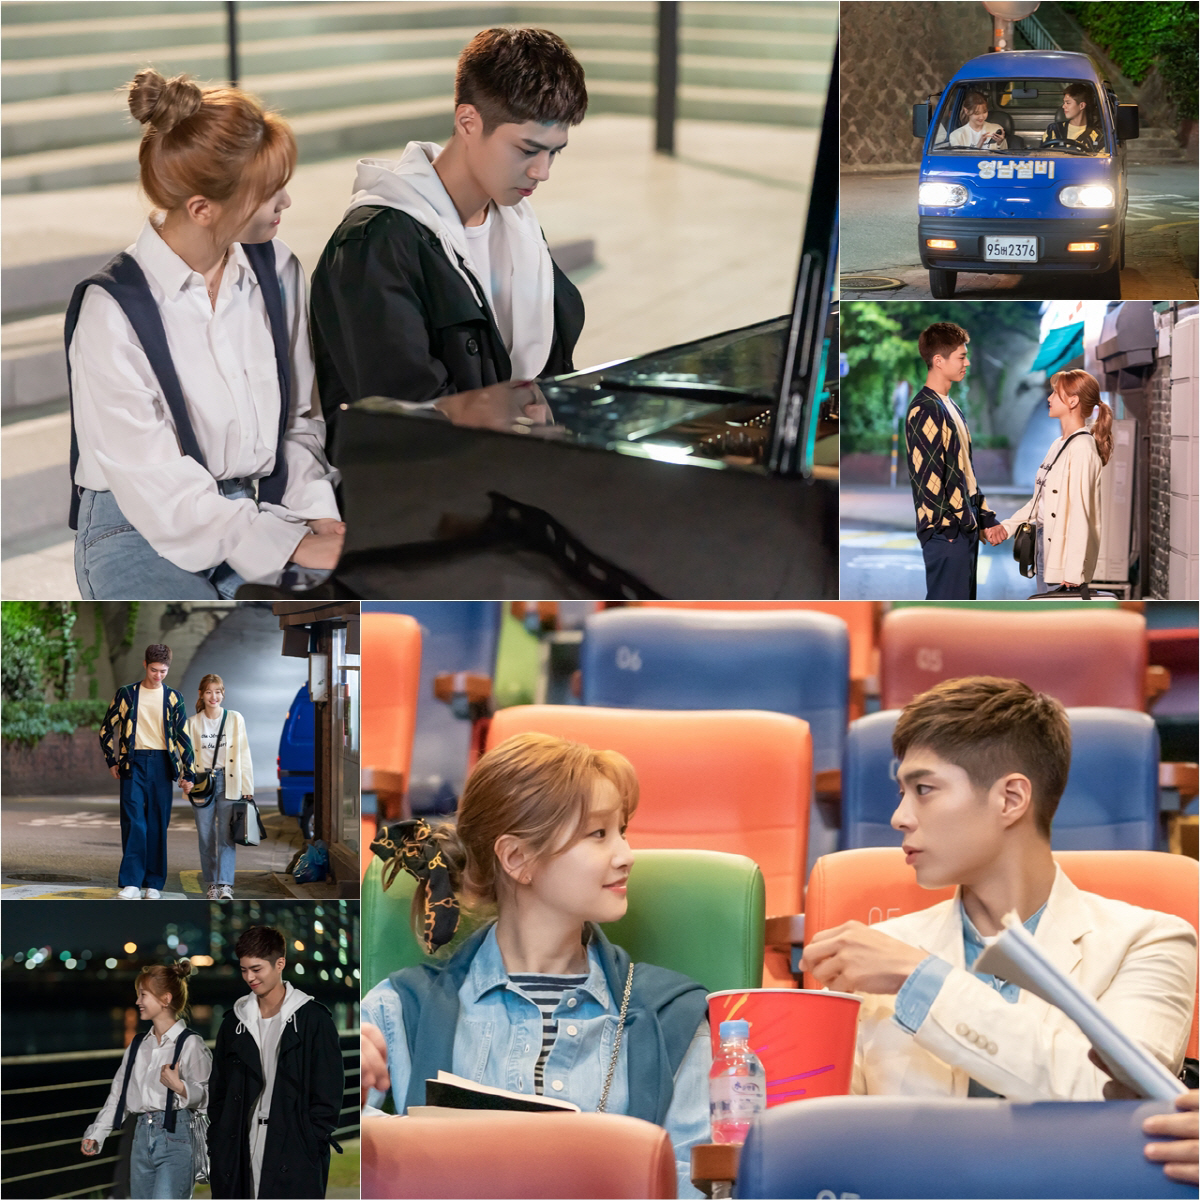 Record of Youth Park Bo-gum and Park So-dams dream challenge, a romance that is full of excitement fills the hearts of viewers.A new chapter called Sulm was opened on tvN Mon-Tue drama Record of Youth (director Ahn Gil-ho, playwright Ha Myung-hee, production fan entertainment, studio dragon).Park Bo-gum and Park So-dam, who endure and overcome difficult today to achieve their dreams.The unexpected excitement that came to them heralds a great change: the two, who know the weight of reality better than anyone, shared pain and permeated each other.Friend, and finally the romance of two people who have developed into lovers in the relationship between Passion and fan, which was the only comfort and escape, are pouring hot.I know how hard it is to take one step toward my dream, so the change of Sa Hye-joon and Ahn Jung-ha, who are comforted by being together, made the viewers feel excited.So the ranking of the topic was Olki and showed off its power.In the third week of September, which was announced by Good Data Corporation, a topic analysis agency, JiSoo (September 14-September 20), it ranked first for two consecutive weeks in the entire drama category including terrestrial, full-length and cable, and also ranked first in the Influential Program Drama for two consecutive weeks in content influence JiSooo (CPI Poored by RACOI).At the center of the over-indulgence of viewers are Park Bo-gum and Park So-dam.Although I am hurt by the unfavorable reality, I have poured out the sympathy The Warlords every time I put the youth today in reality, trying to achieve my dream with my own power without giving up.The new page of Sulm on the hot growth record is causing an explosive reaction.In the meantime, Park Bo-gum, Park So-dams Simkung The Warlords, B-cuts, reminds me of the excitement.The beginning of the relationship is moral, but it became a friend who was stable with Sa Hye-joon, who had a lot of consensus.The Confessions, I wanted to say thank you when I met you, to Sa Hye-joon, who was a force for me, became a great force for Sa Hye-joon, who was struggling with his self-esteem.At the moment when I was one step closer to the dream of Actor, Sa Hye-joon realized the reality of emotion about An Jeong-ha.His rain-confessions, I think you like it, gave viewers a stop thrill as well as stability.In the photo, I feel the excitement and trembling in the hands of the lover in the picture.Sa Hye-joon, who was the comfort of Ahn Jeong-ha, is now stable to make him laugh. Sa Hye-joon, who only endured alone, is the first to show his sincerity and depend on him.The romance of two youths that resemble each other is so sympathetic and excited.It is also the reason why the first kiss of the two people came to the heart over the excitement at the end of the song I will remember the two hands that caught the step of many hesitations.The warm and exciting kiss ending that touches the hard and tired mind is the Warlords, which is one of the viewers.The two people sitting side by side in front of the piano raise the jiSoo even more.Unlike Sa Hye-joon and An Jeong-has pink romance, reality is still not green.Sa Hye-joons drama casting was canceled, and Ahn Jung-ha became a formal Desiigner, but the conflict with Jinju Desiigner deepened.I wonder what the romance of the two will act as a variable for the youth who runs toward the dream, and what else is waiting behind the wall they have to overcome.Record of Youth production team said, Watch and see if the two people who have become special to each other can achieve both dreams and love and have a brilliant tomorrow.On the other hand, tvN Mon-Tue drama Record of Youth is broadcast on tvN every Monday and Tuesday at 9 pm.